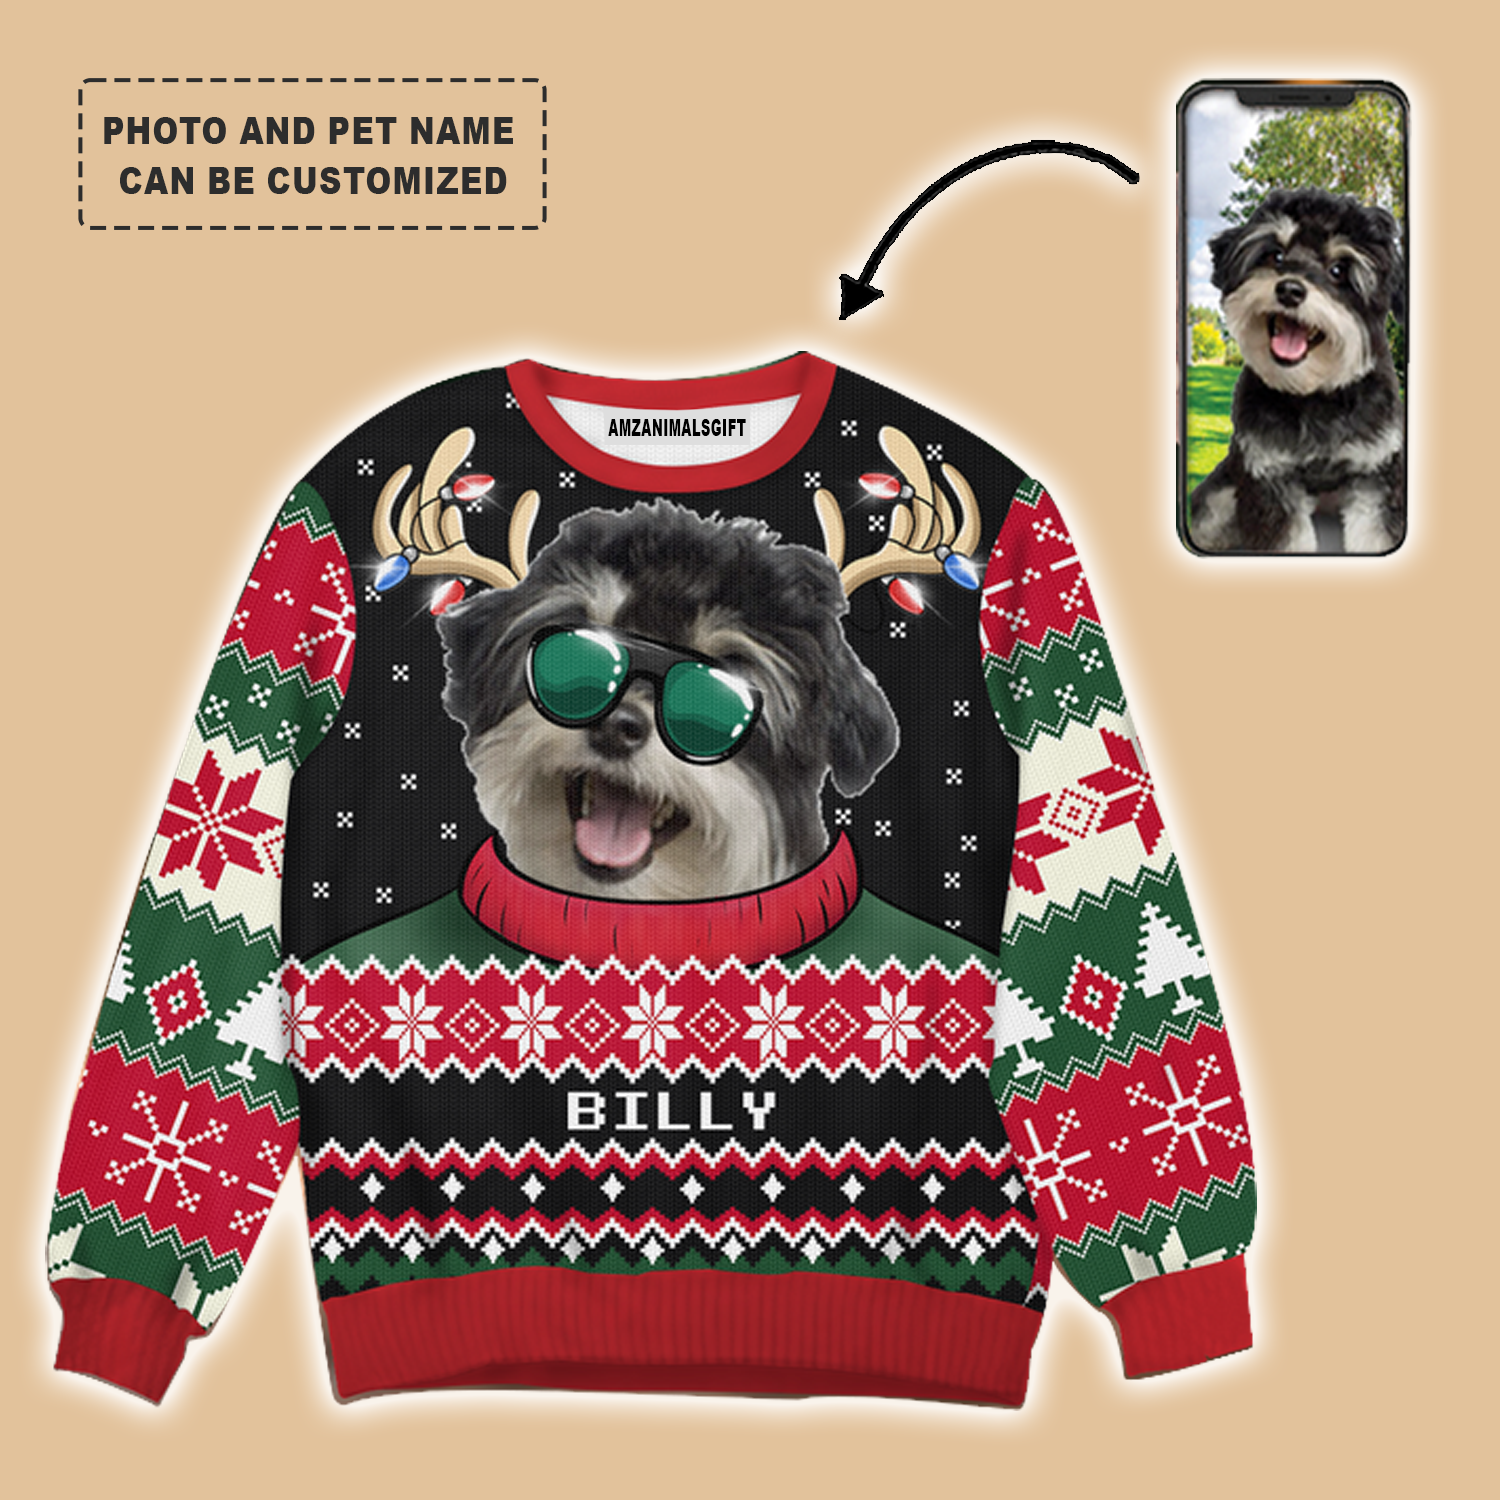 Dog Cat Pet Ugly Christmas Sweater Customized Name And Photo For Men Women On Christmas, New Year, Autumn, Winter